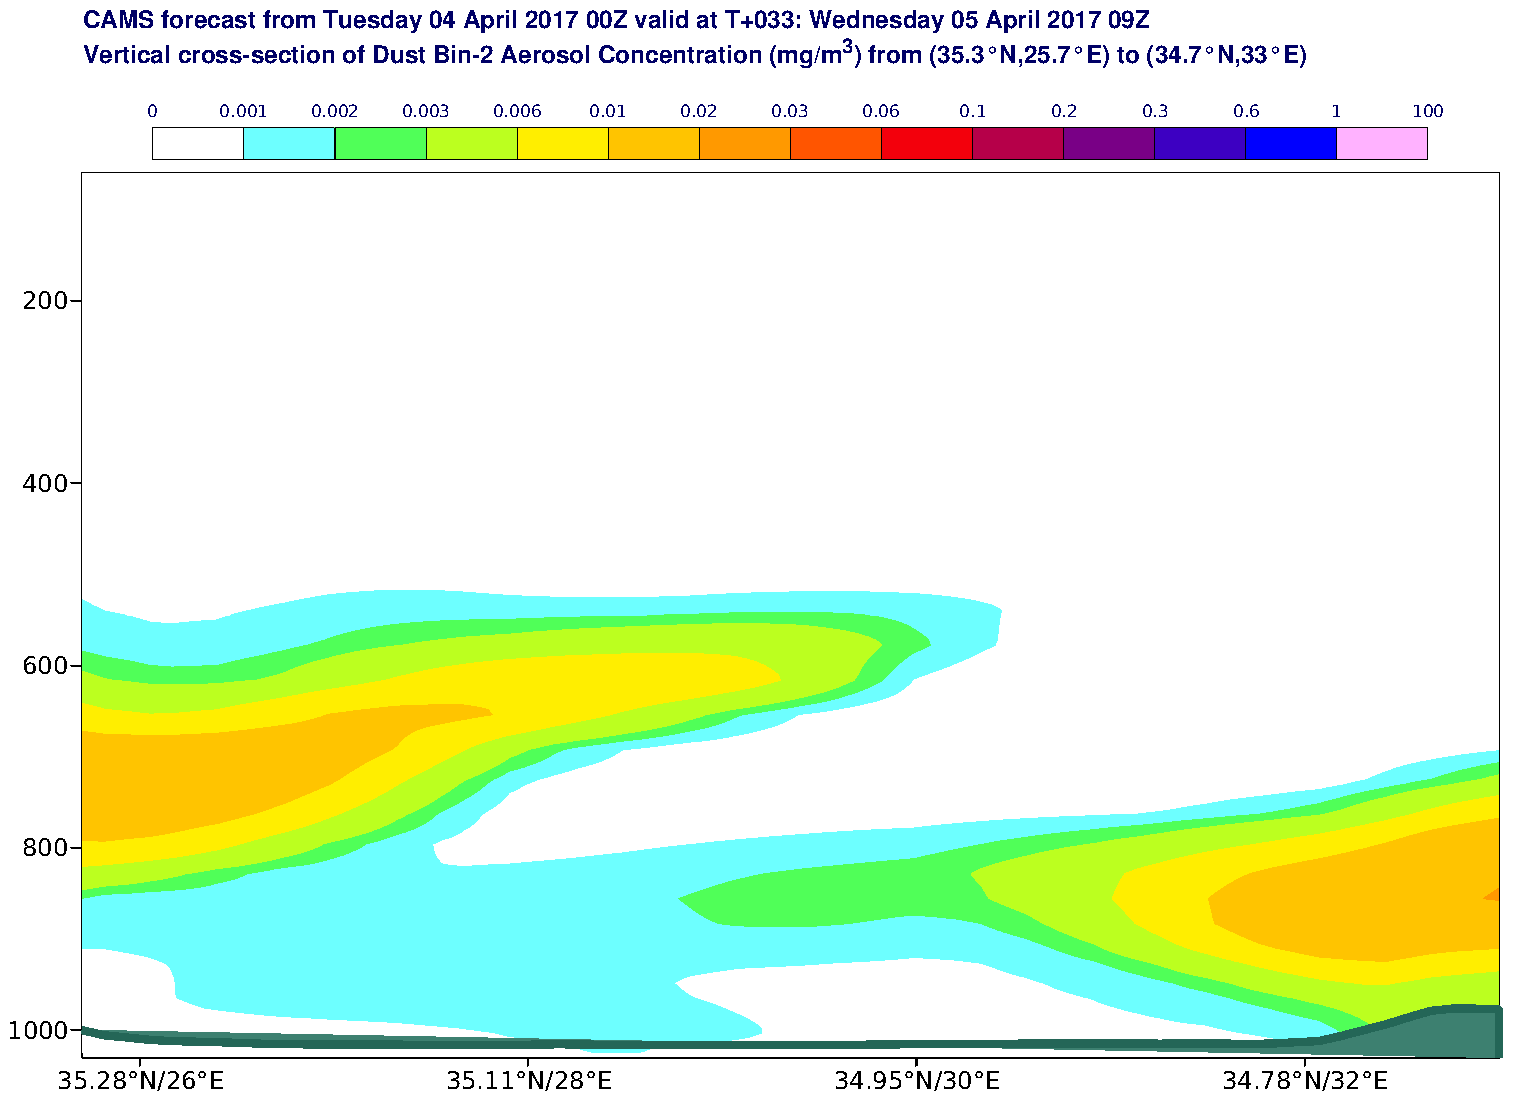 Vertical cross-section of Dust Bin-2 Aerosol Concentration (mg/m3) valid at T33 - 2017-04-05 09:00